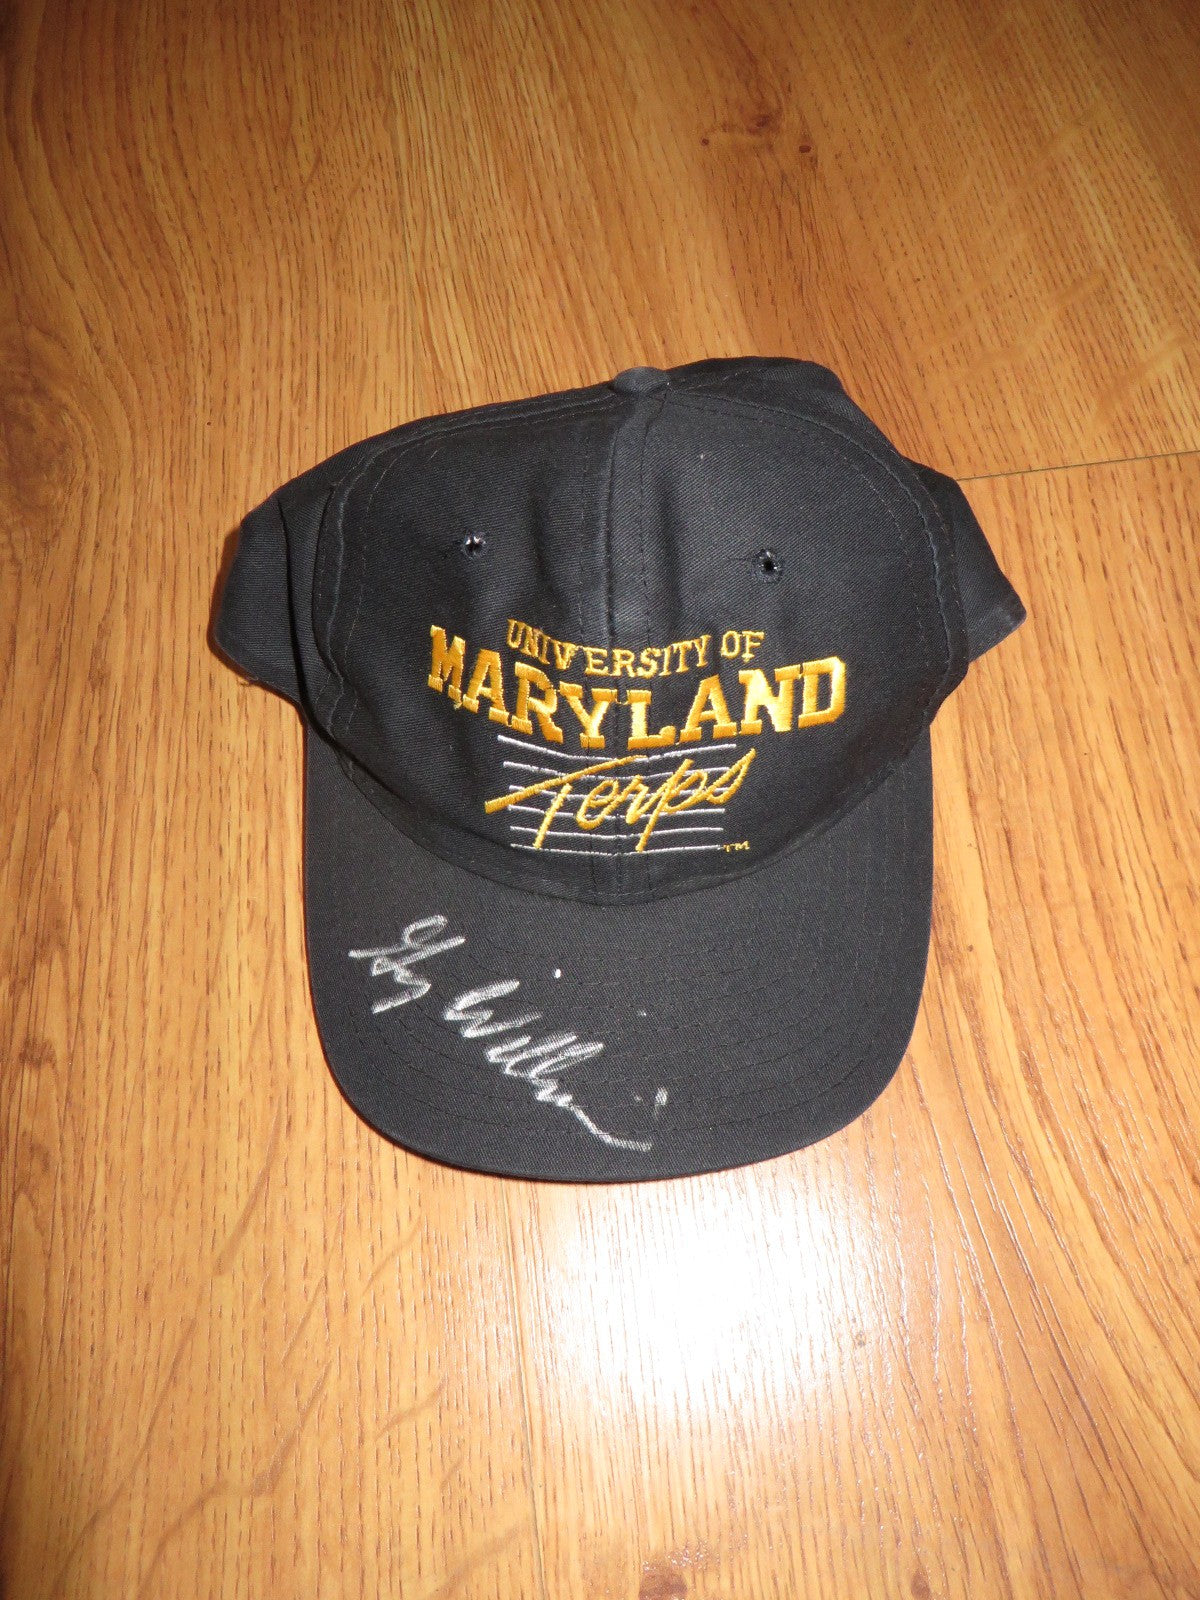 Gary Williams autographed Maryland Terrapins cap or hat